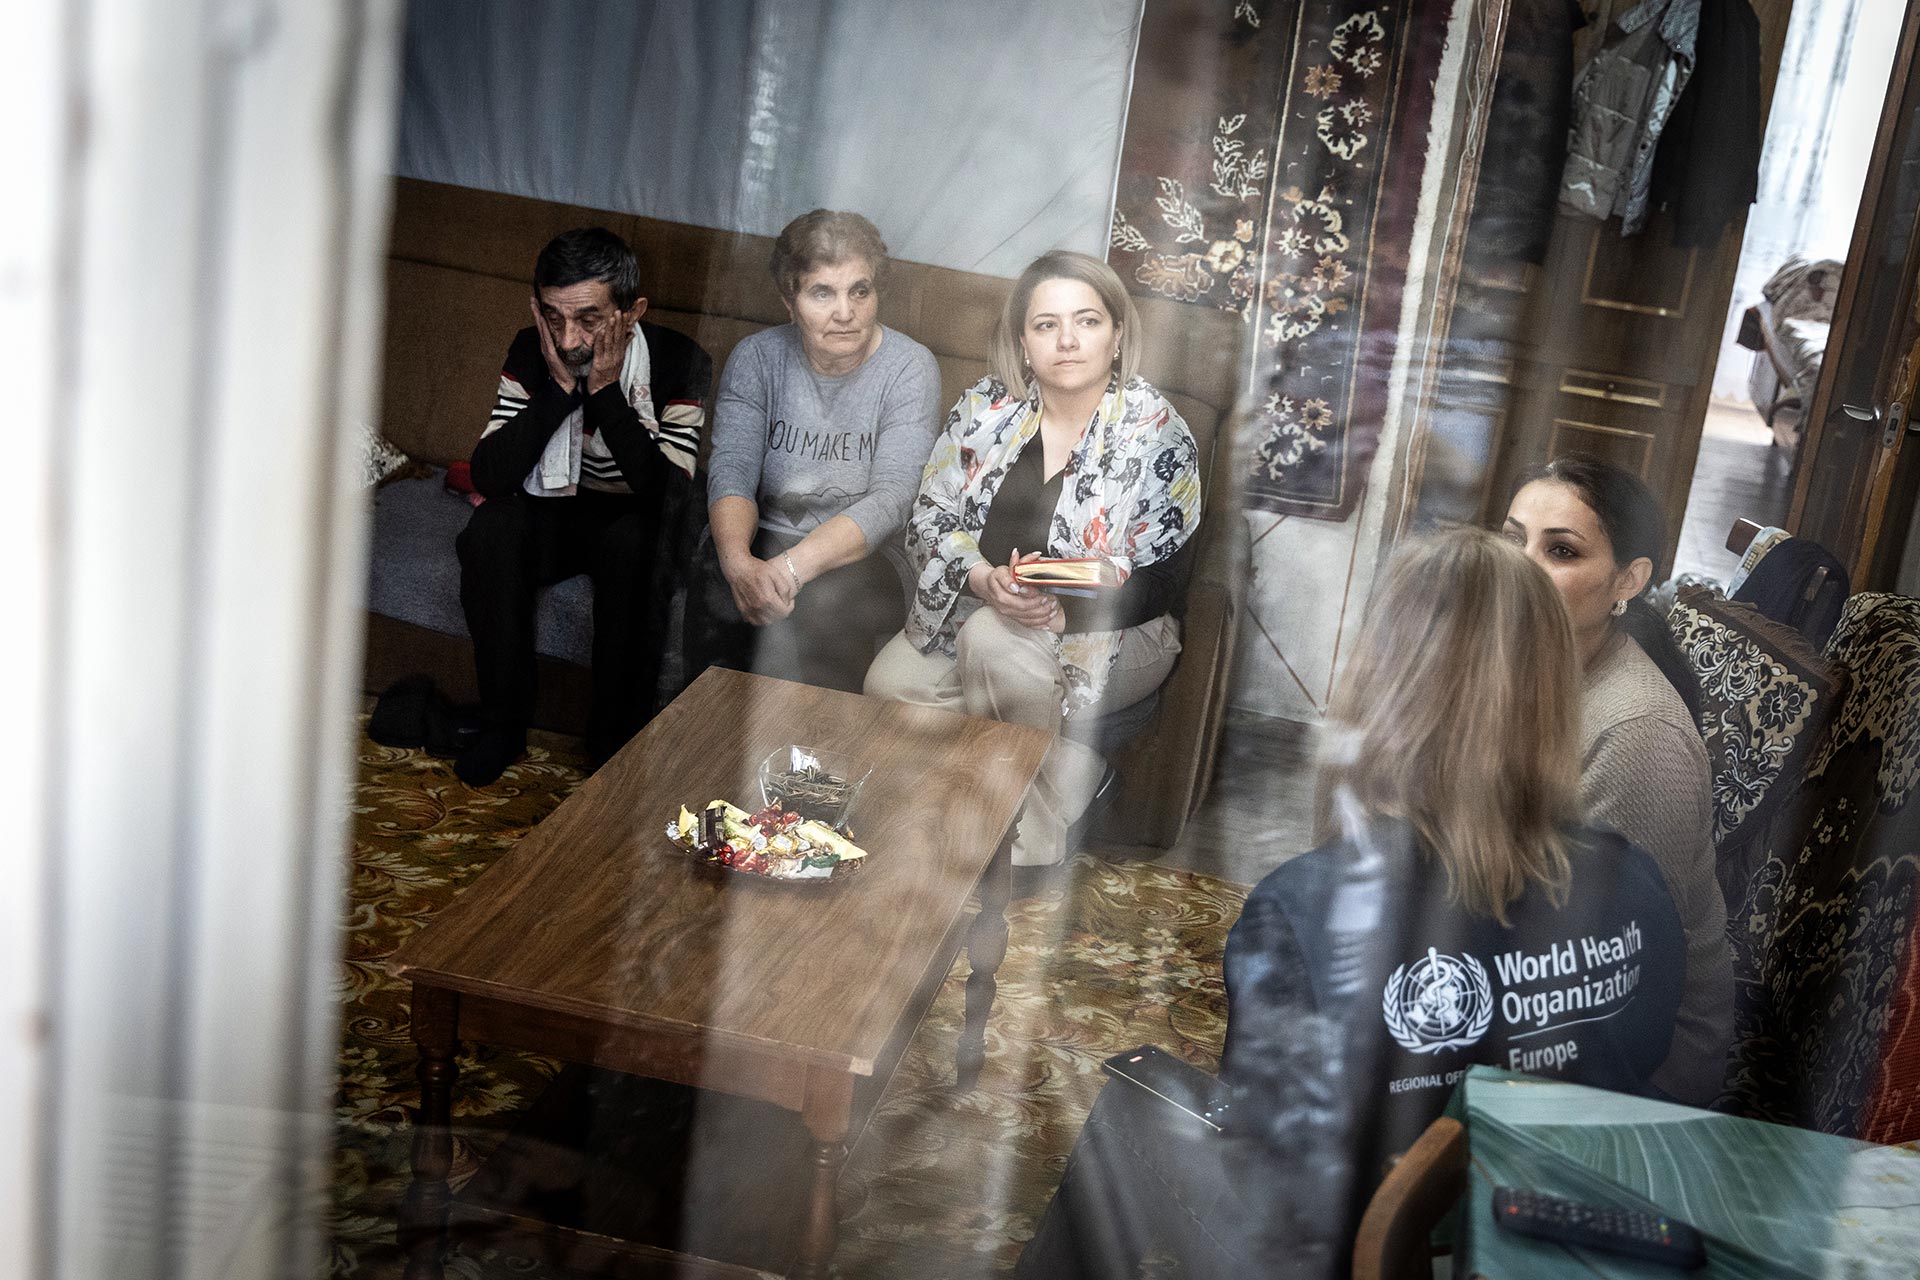 Zara Petrosyan, a social worker from the Karabakh region, meets with a refugee family.